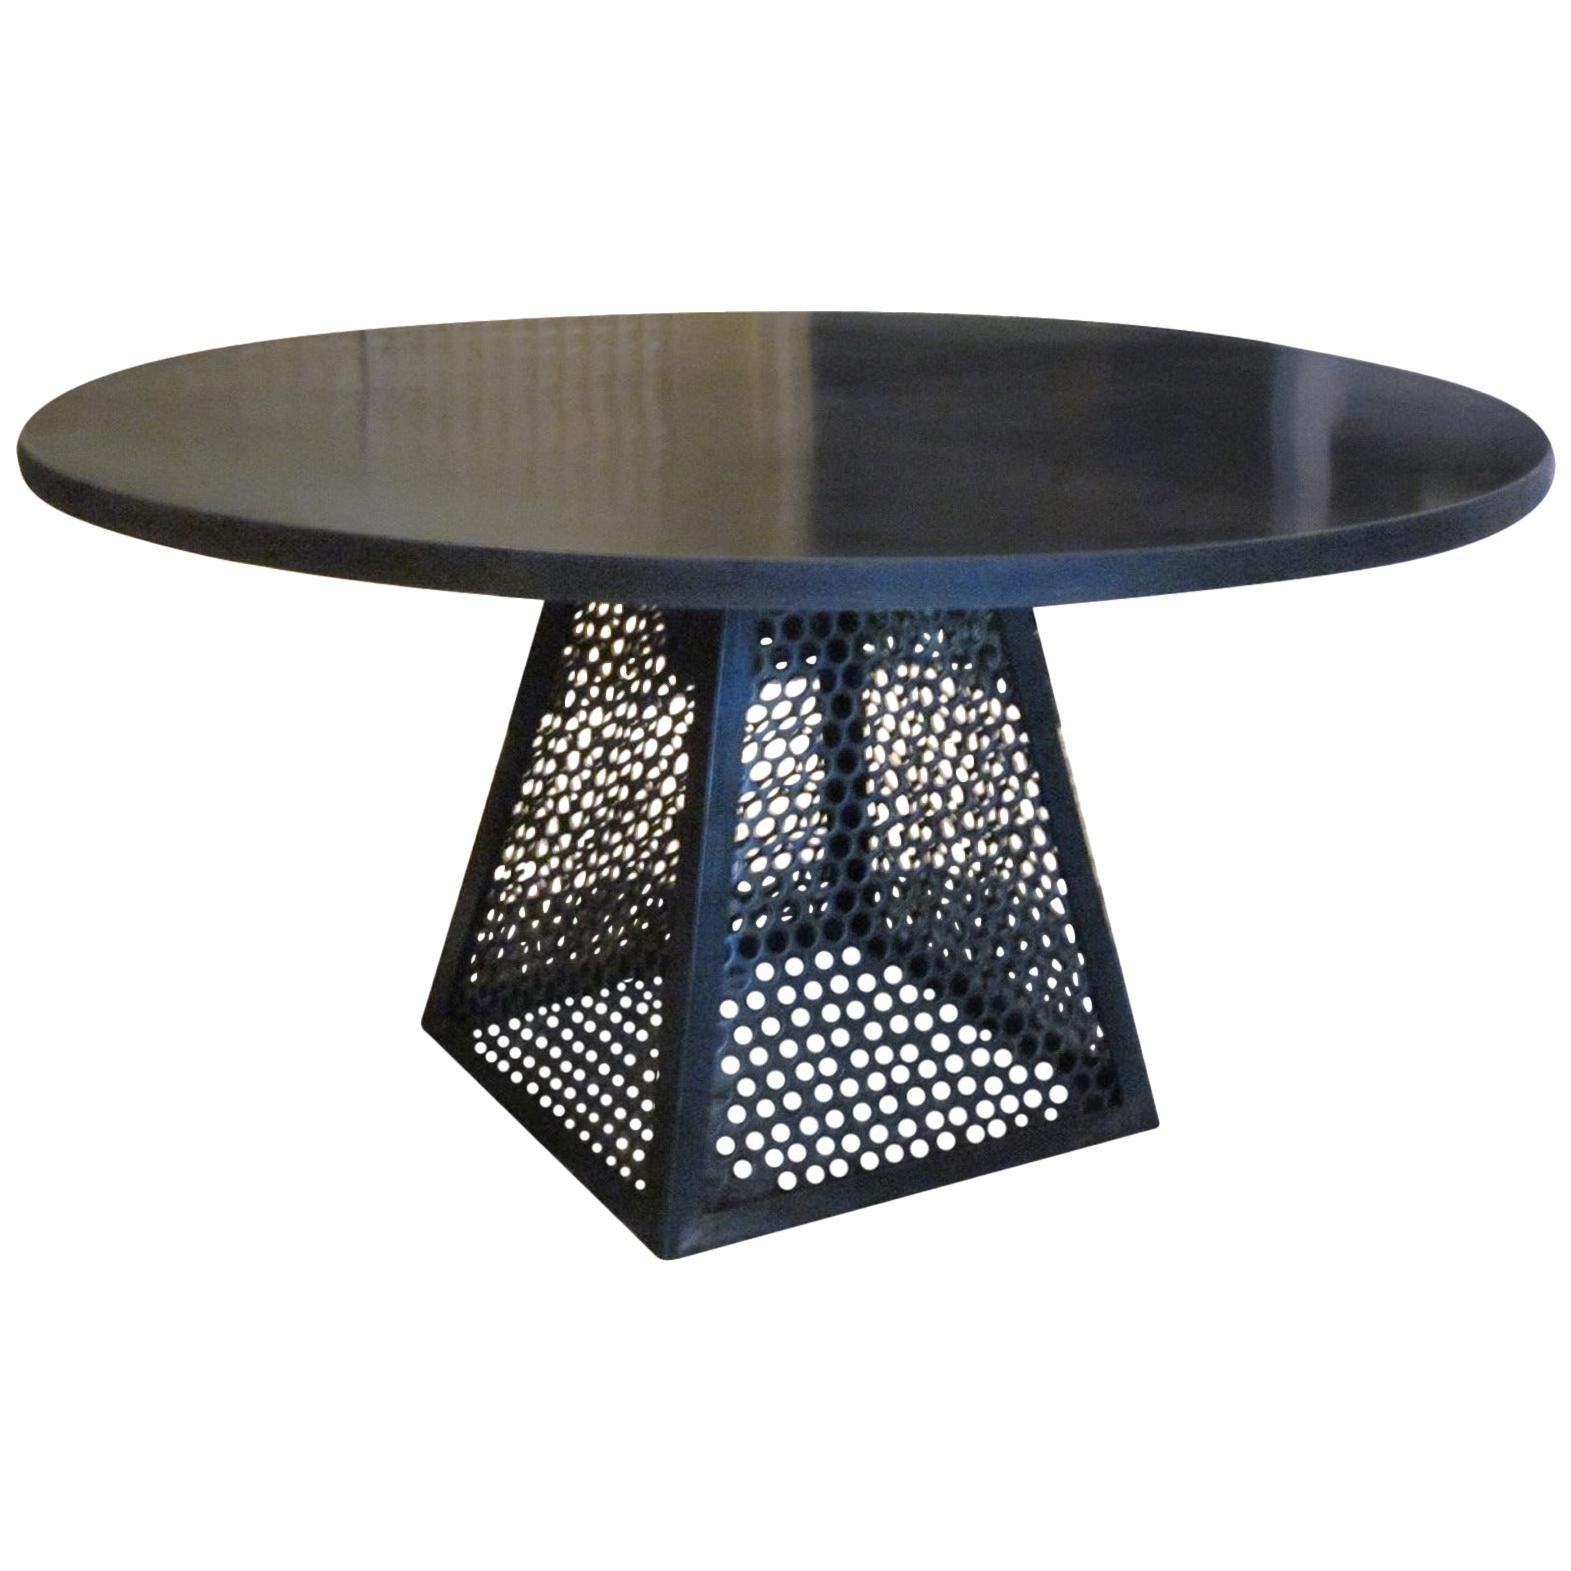 Round Industrial Steel Dining Table, Contemporary